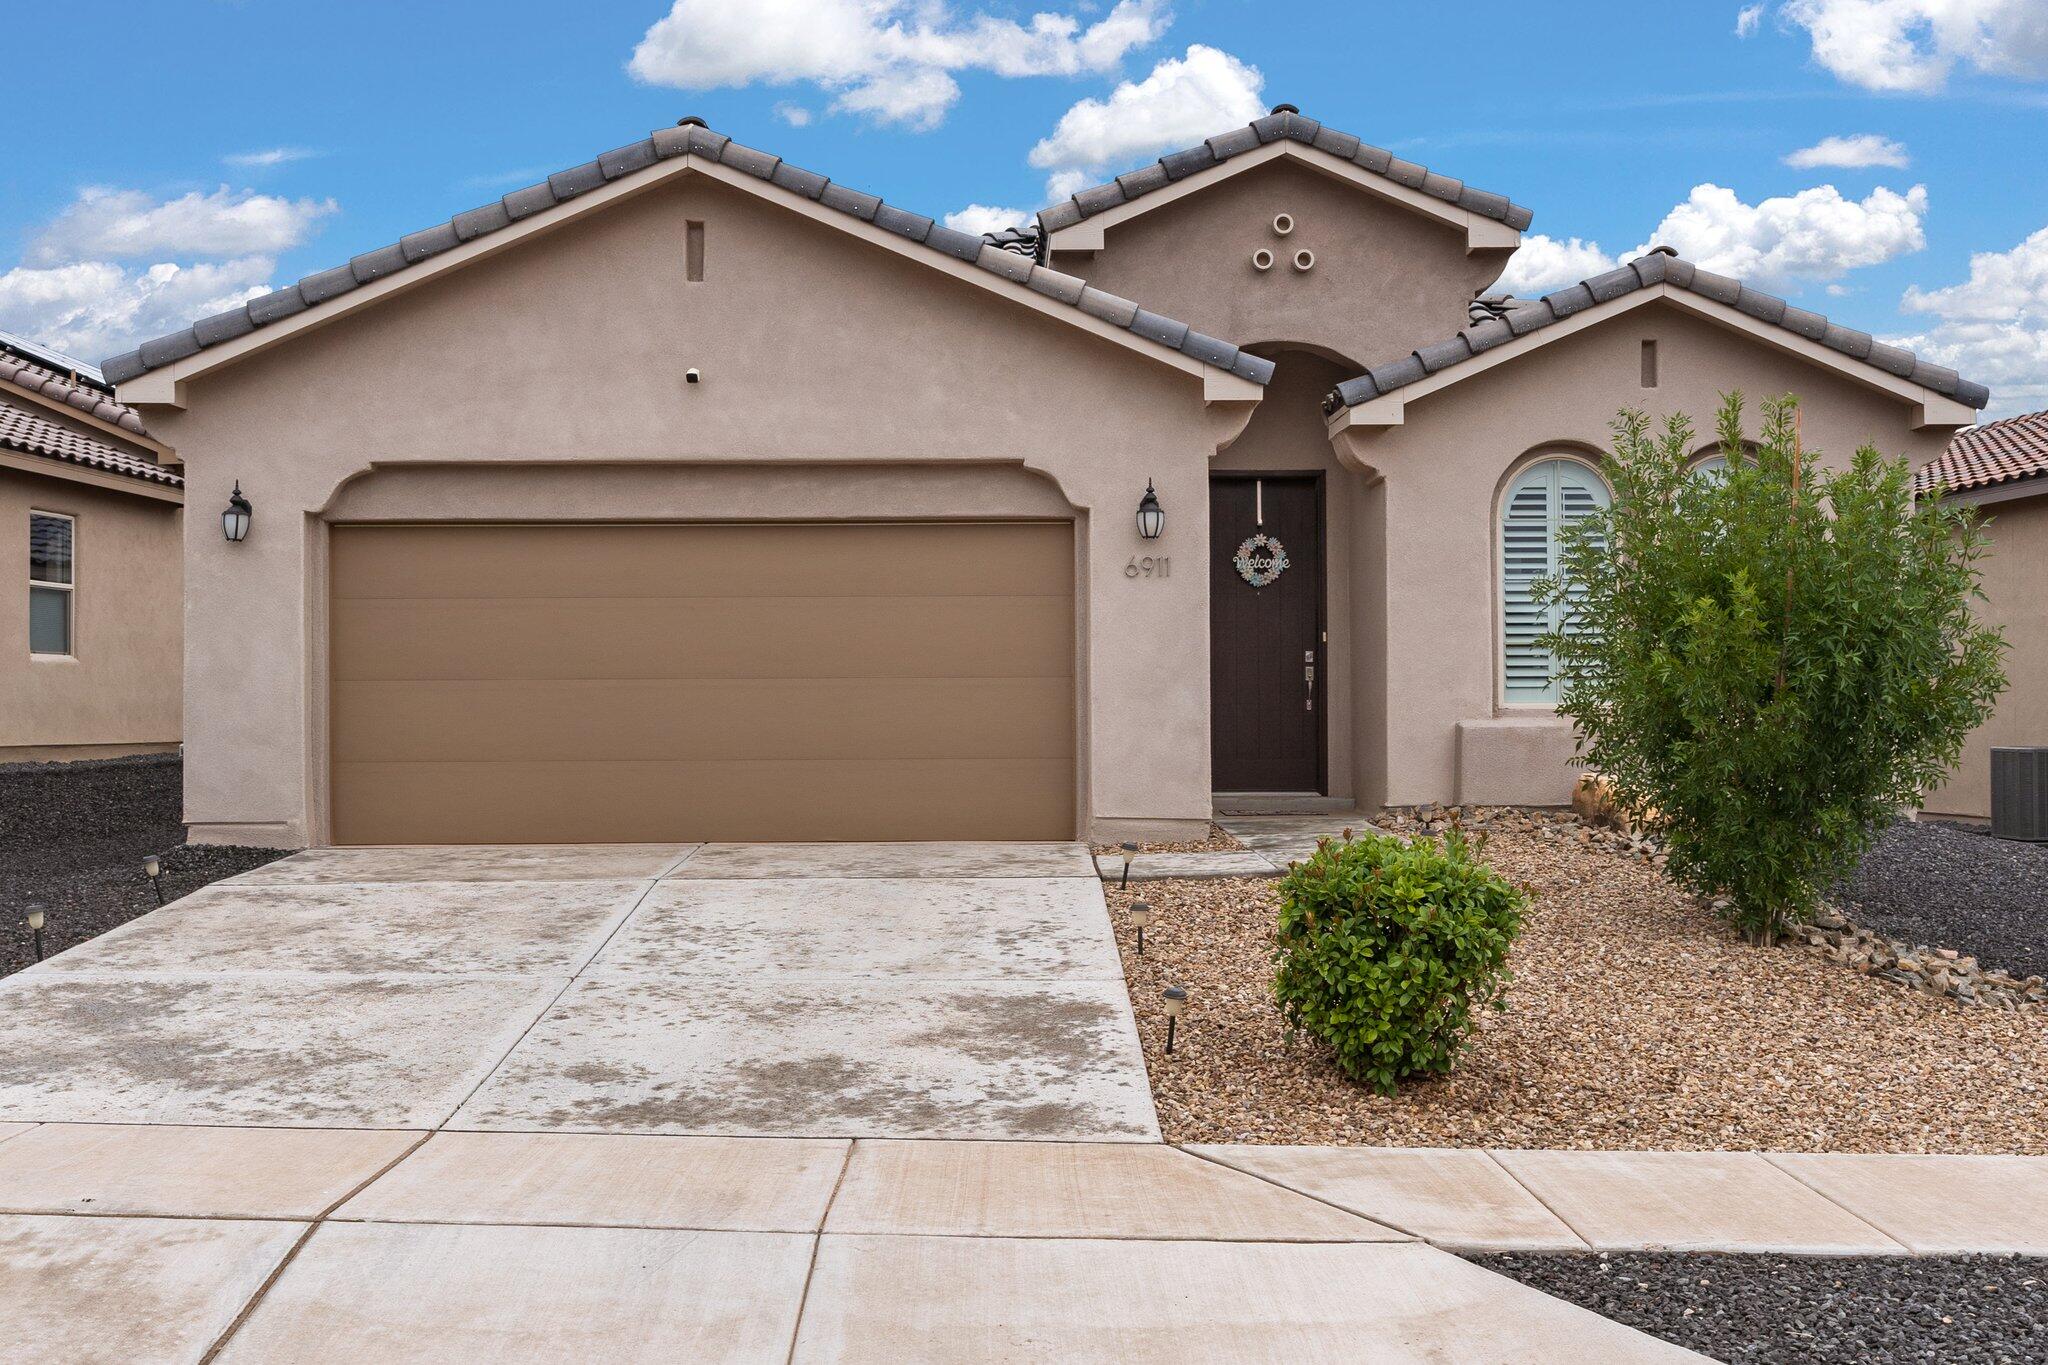 6911 Dusty Drive NE, Rio Rancho, New Mexico 87144, 3 Bedrooms Bedrooms, ,2 BathroomsBathrooms,Residential,For Sale,6911 Dusty Drive NE,1041547